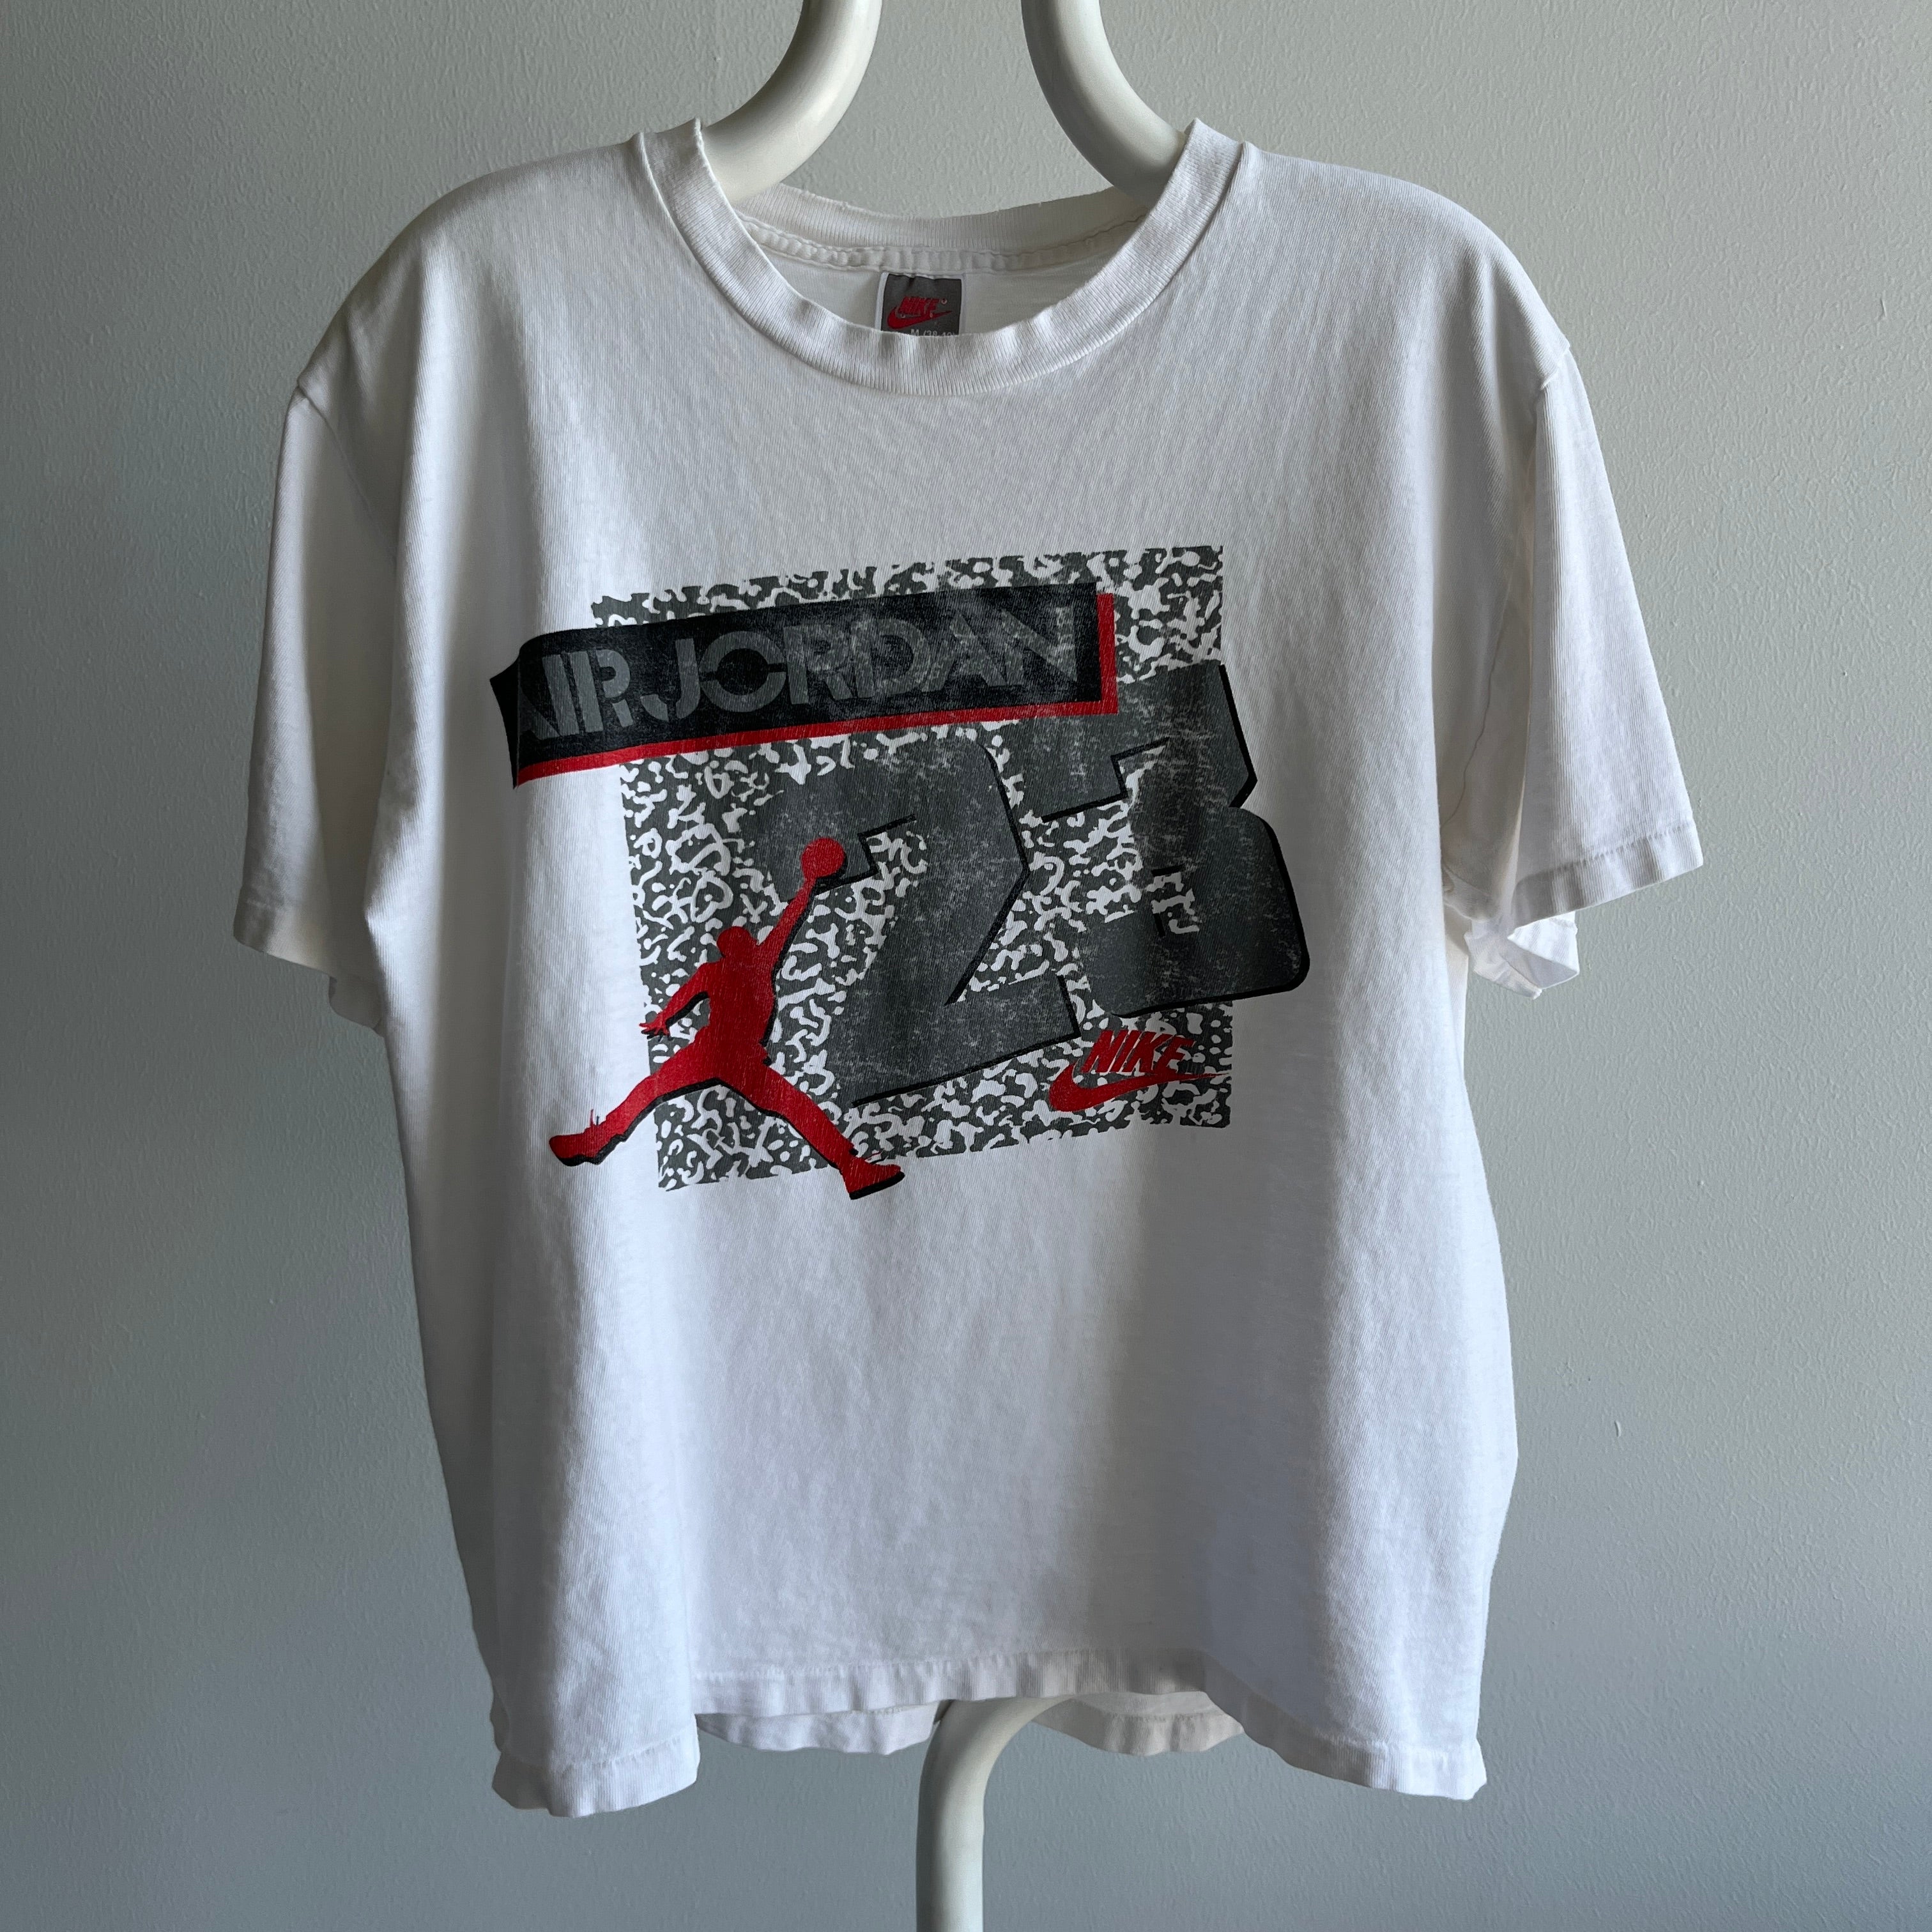 1990s (Early) USA Made Nike Air Jordan Perfectly Worn T-Shirt - Highly Collectible